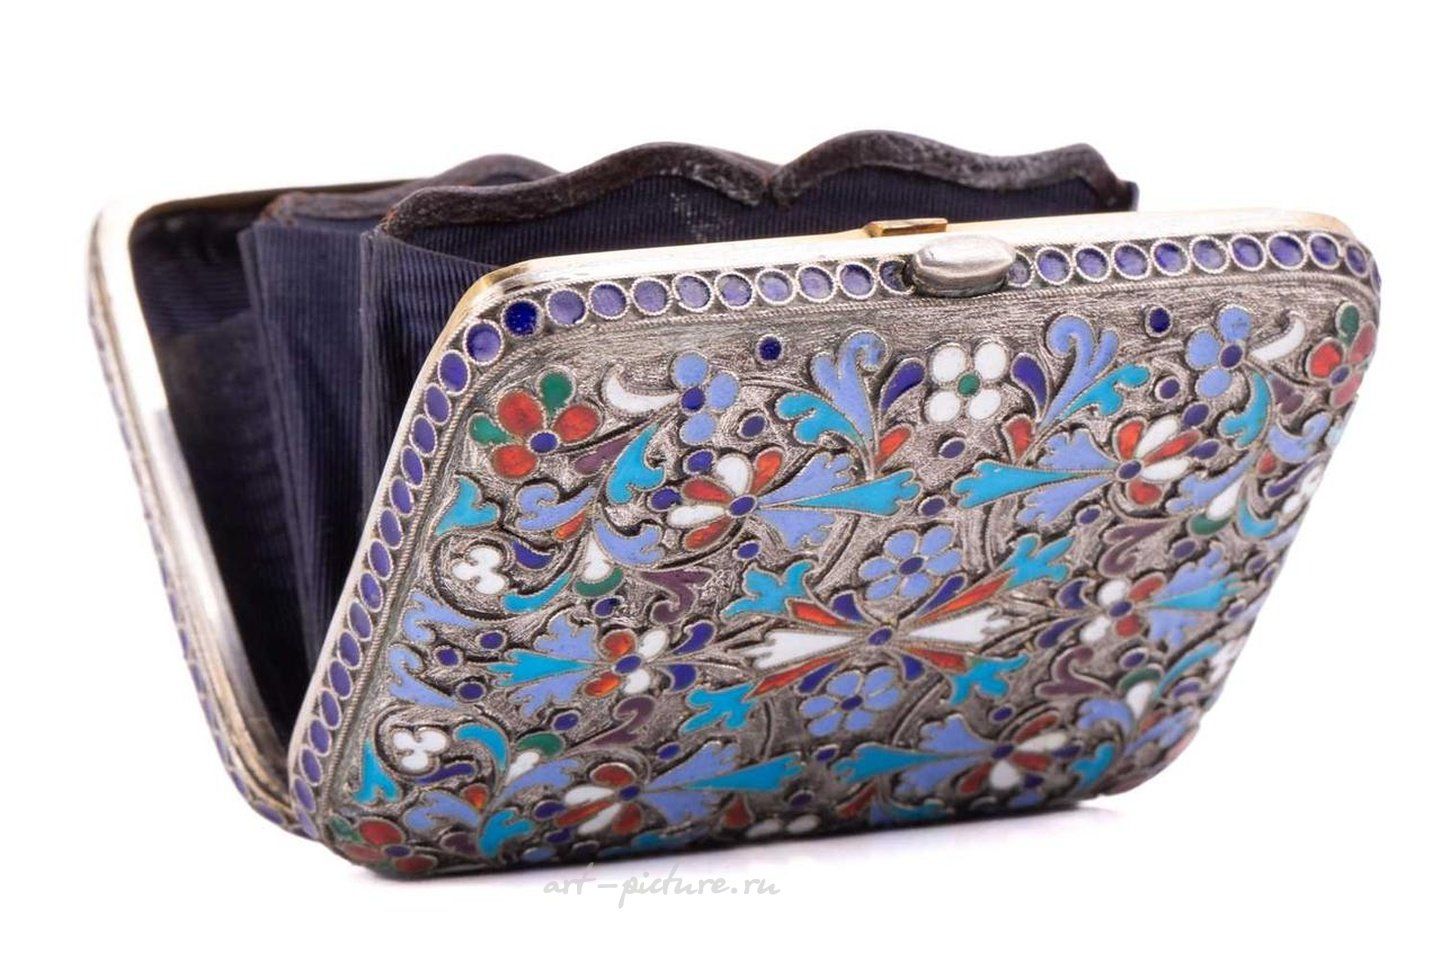 Russian silver , A Russian silver and cloisonné enamel purse, circa 1880, recently acquired from a private collection.